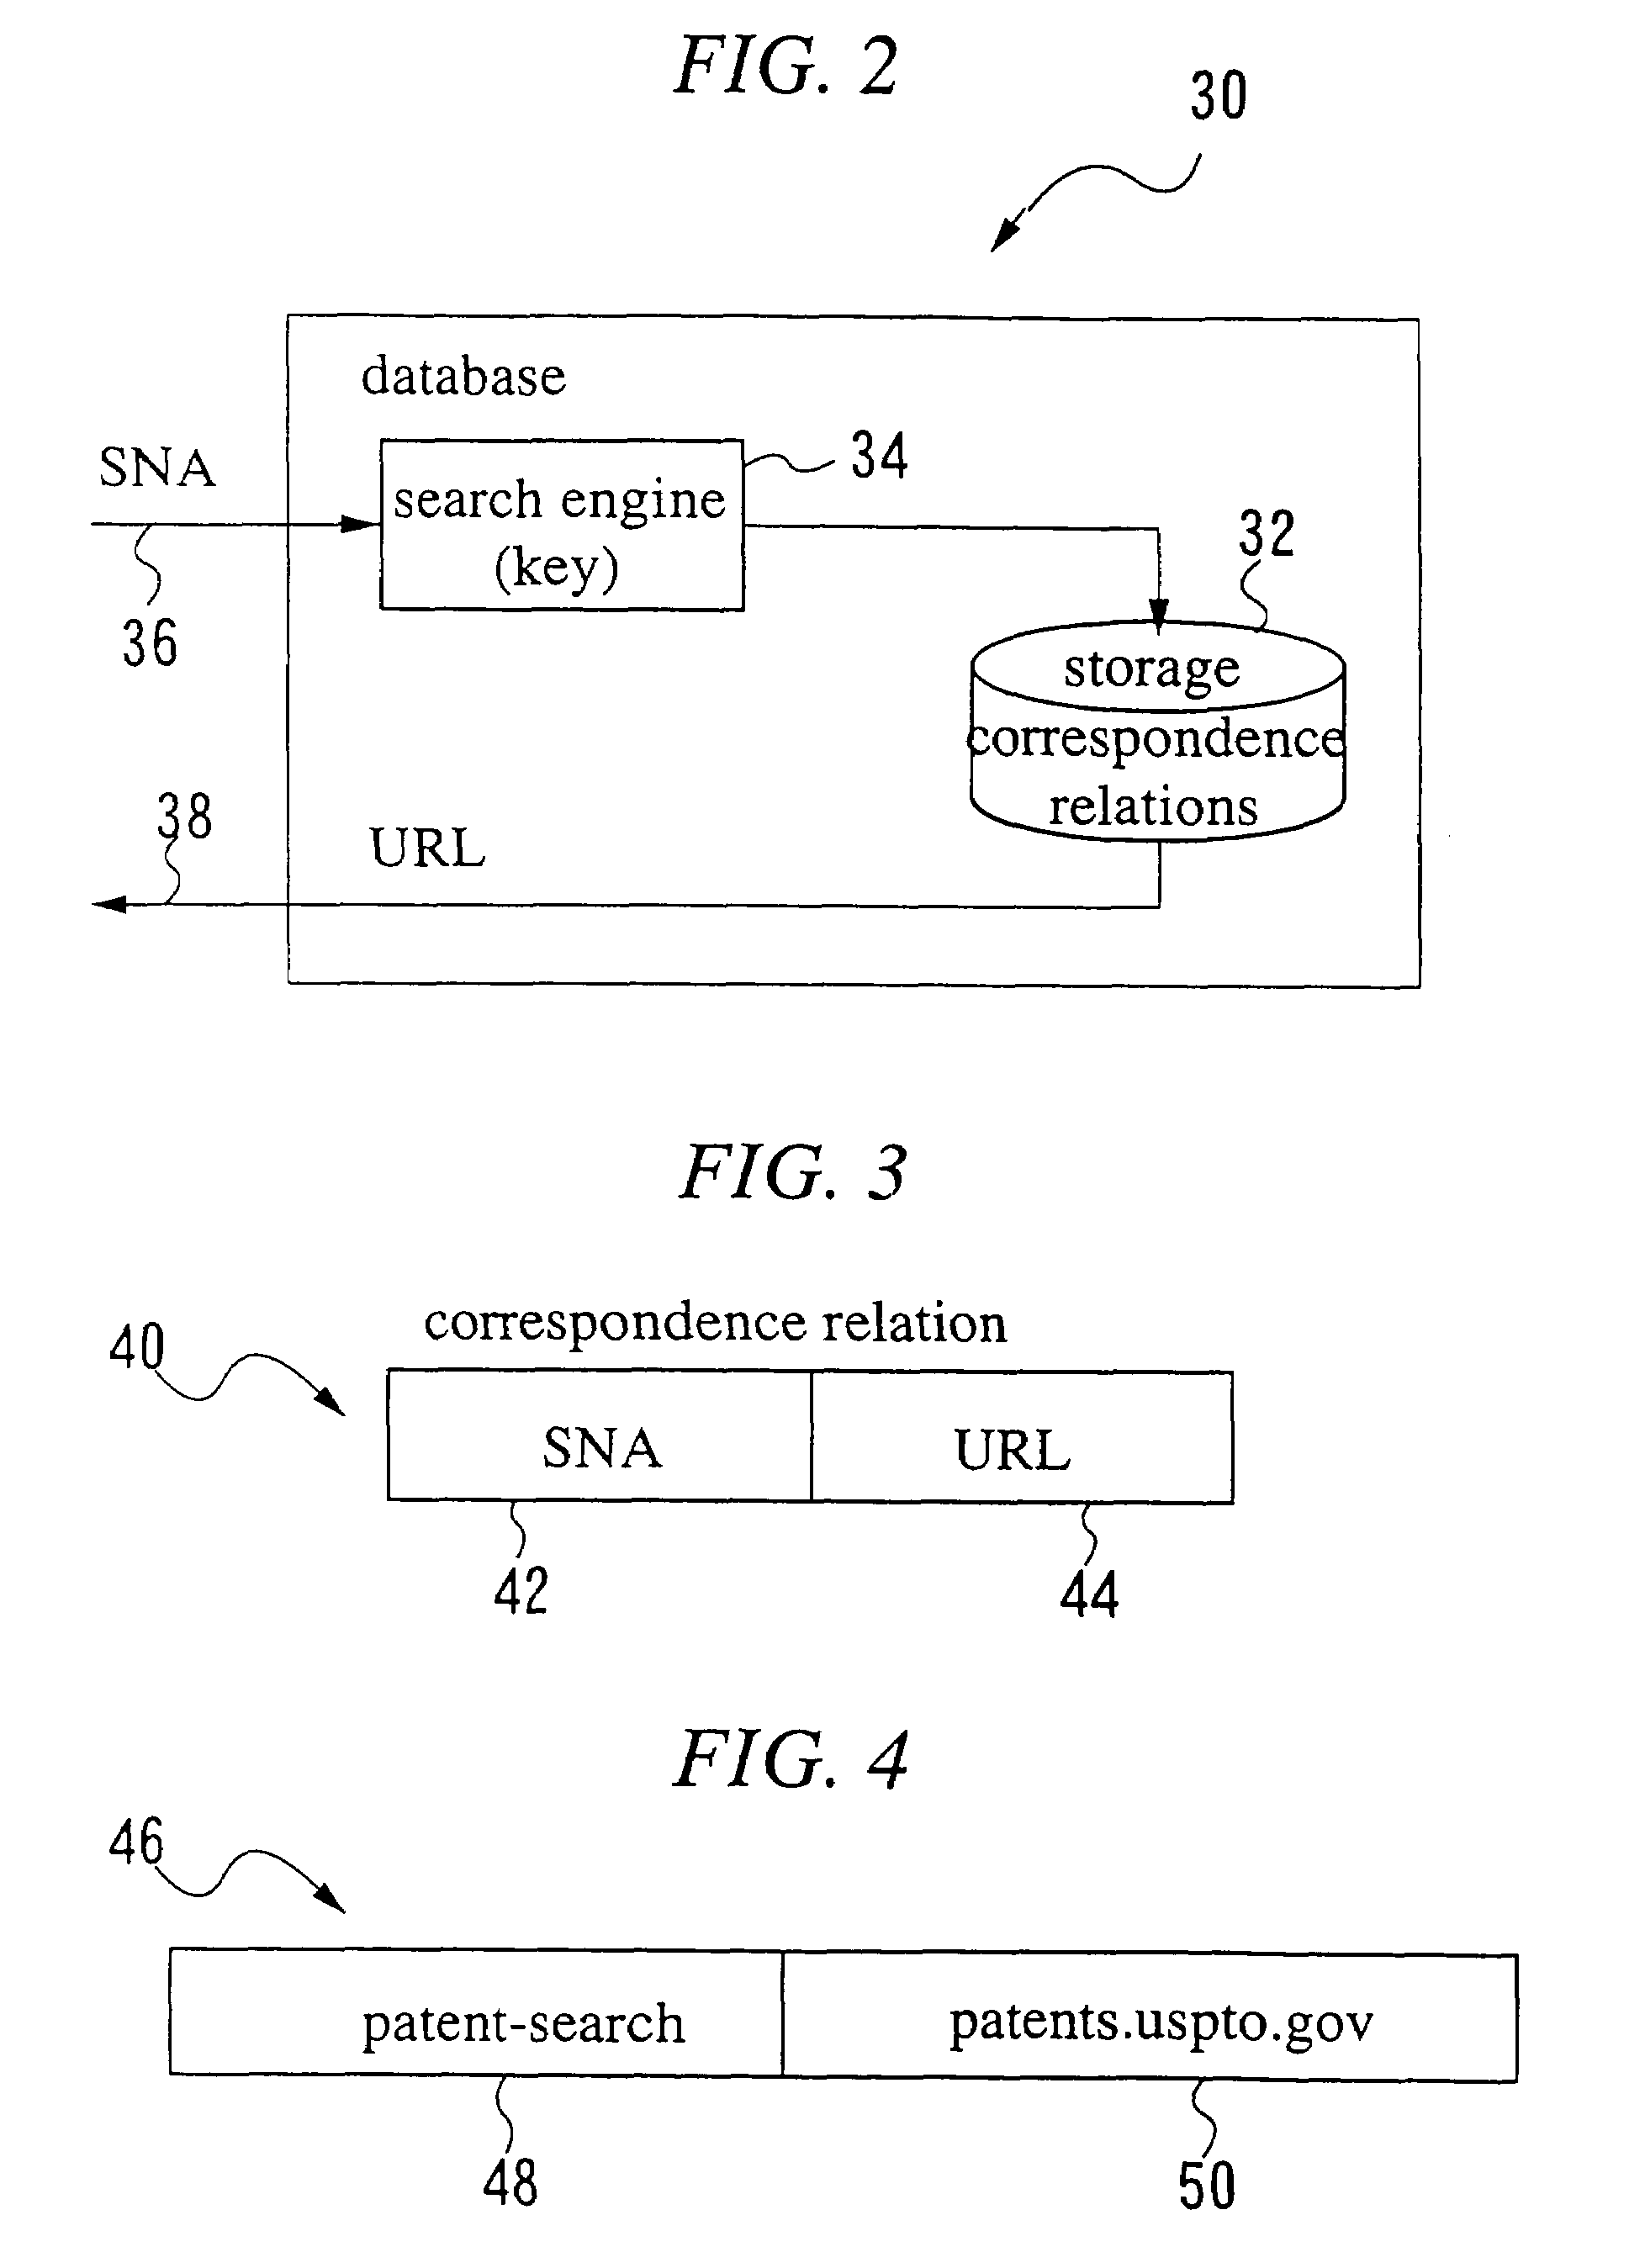 Method and systems for accessing information on a network using message aliasing functions having shadow callback functions